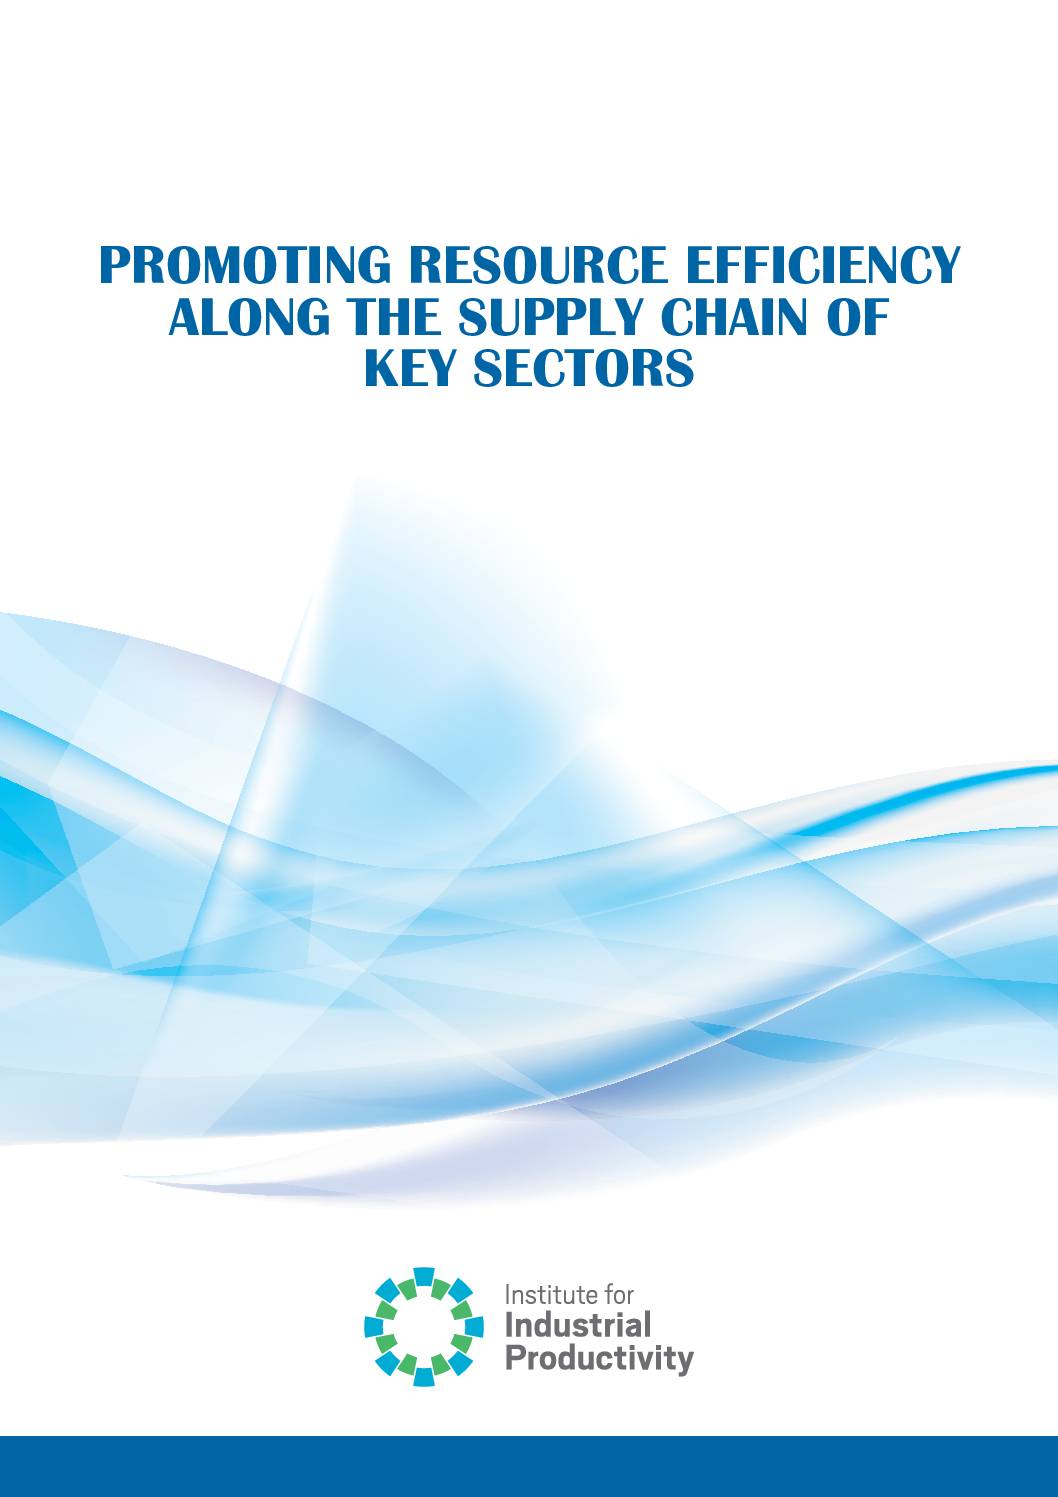 Promoting resource efficiency along the supply chain of key sectors with potential for scale up in South Asia